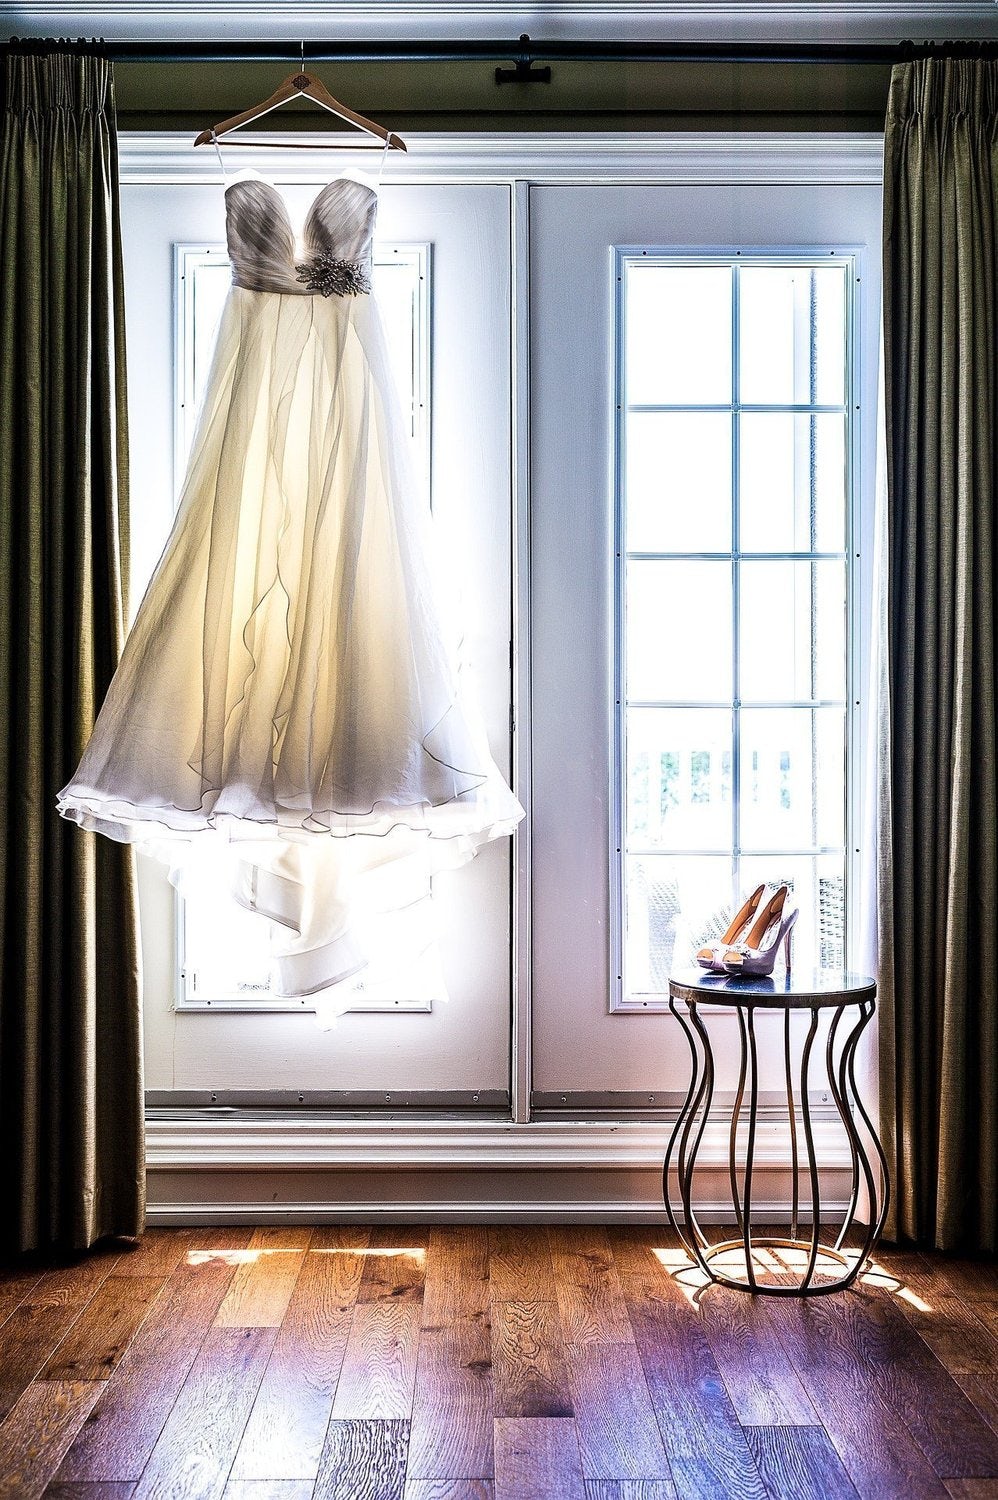 dress hanging in front of window